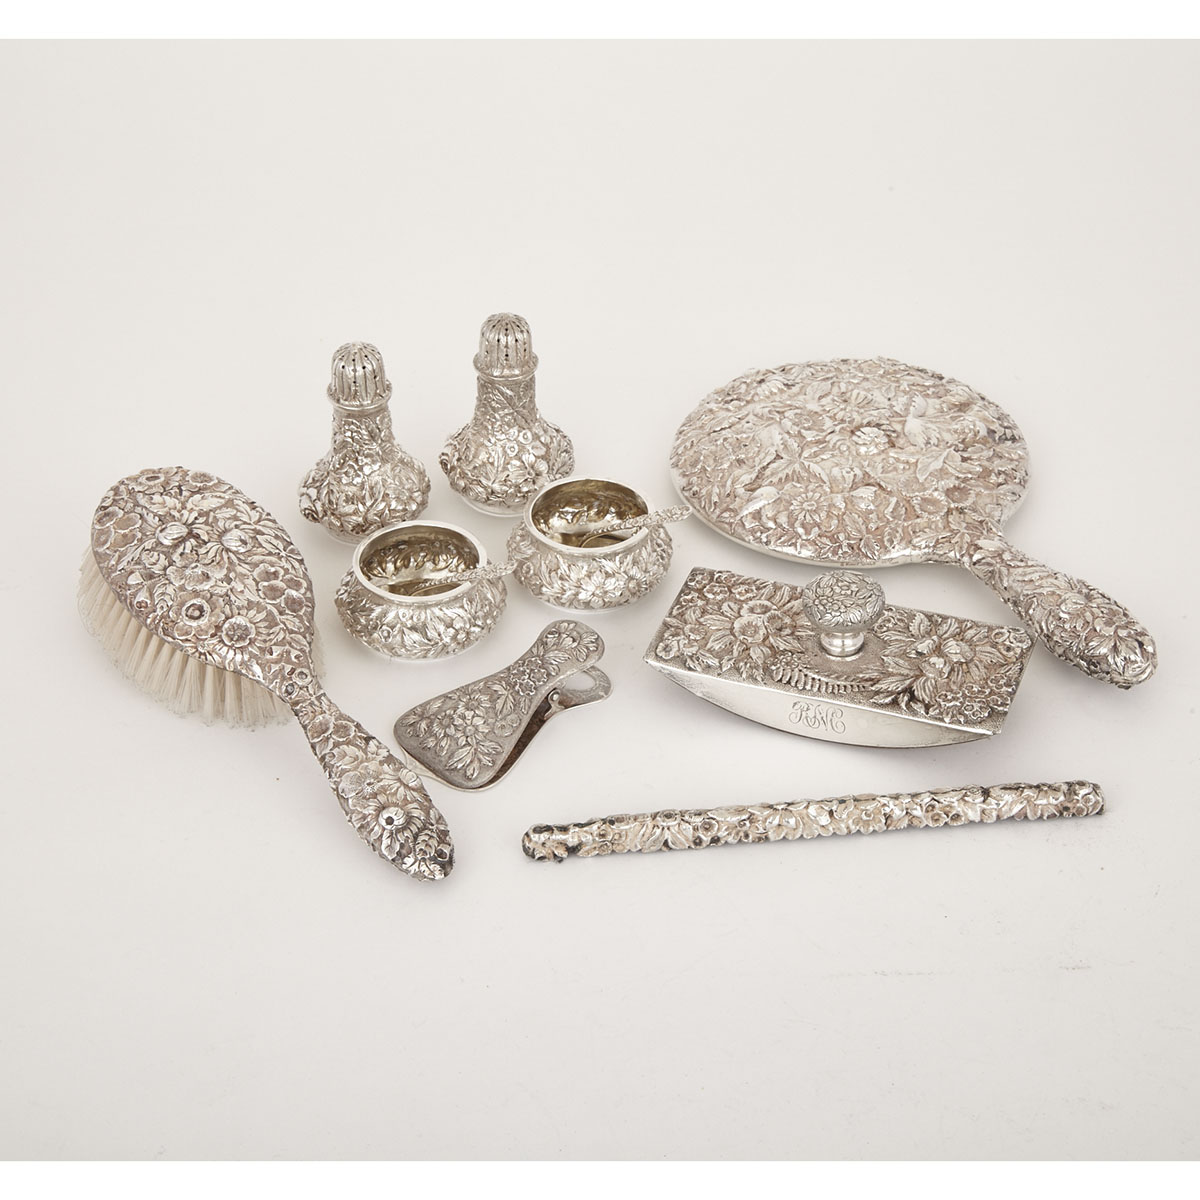 Group of American Silver ‘Repoussé’ Articles, Jenkins & Jenkins, Baltimore, Md., c.1900